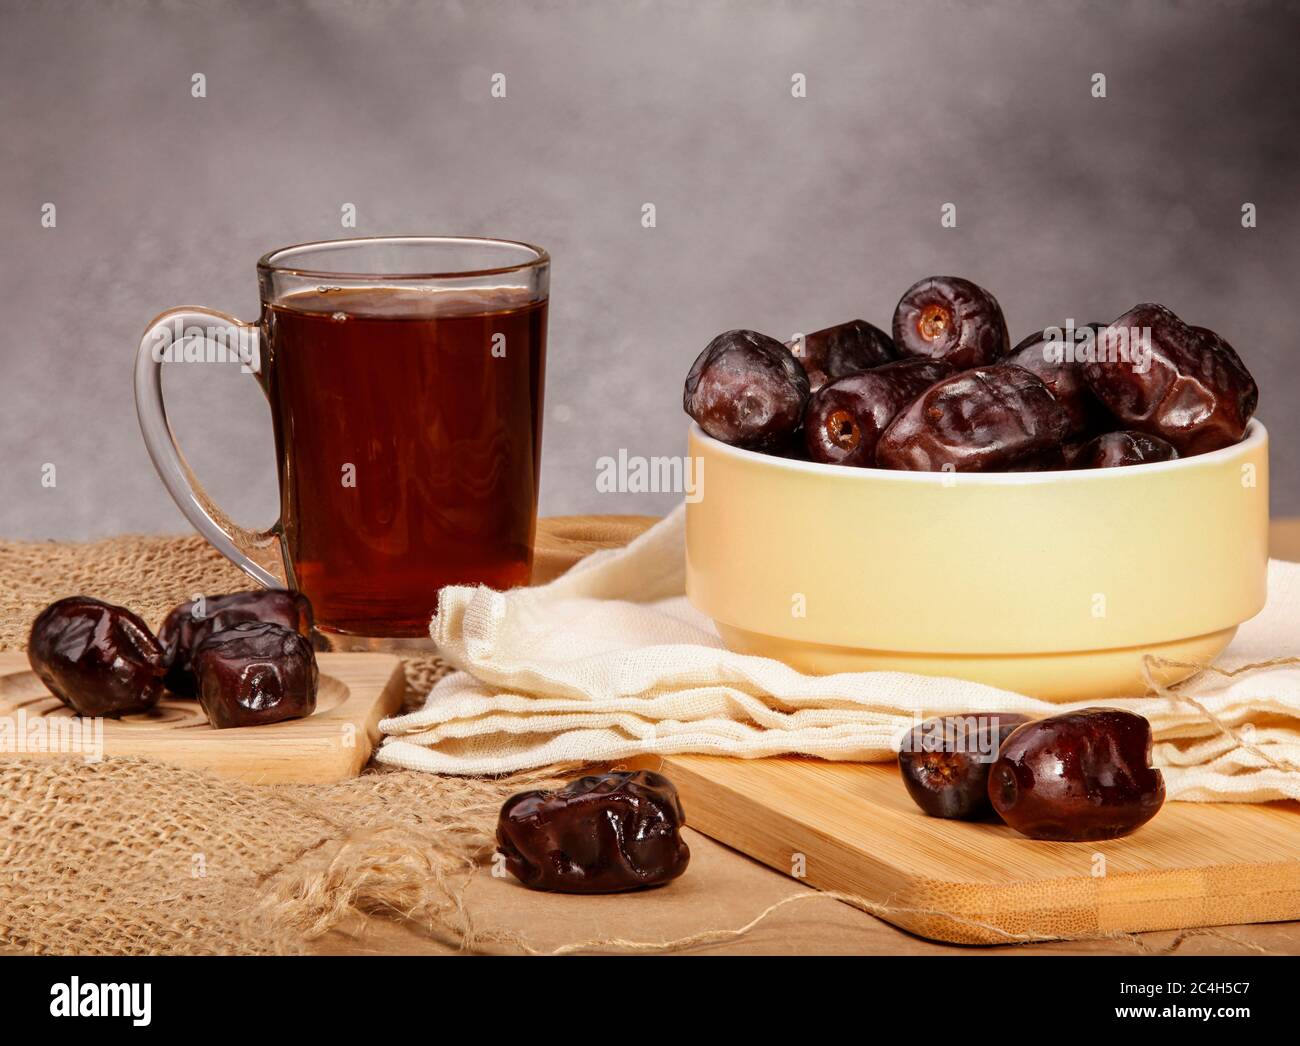 Some dates in a light yellow ceramic bowl and some dates around it on a wooden and sacking surface plus a glass cup of tea. Ramadan dates and tea. Stock Photo